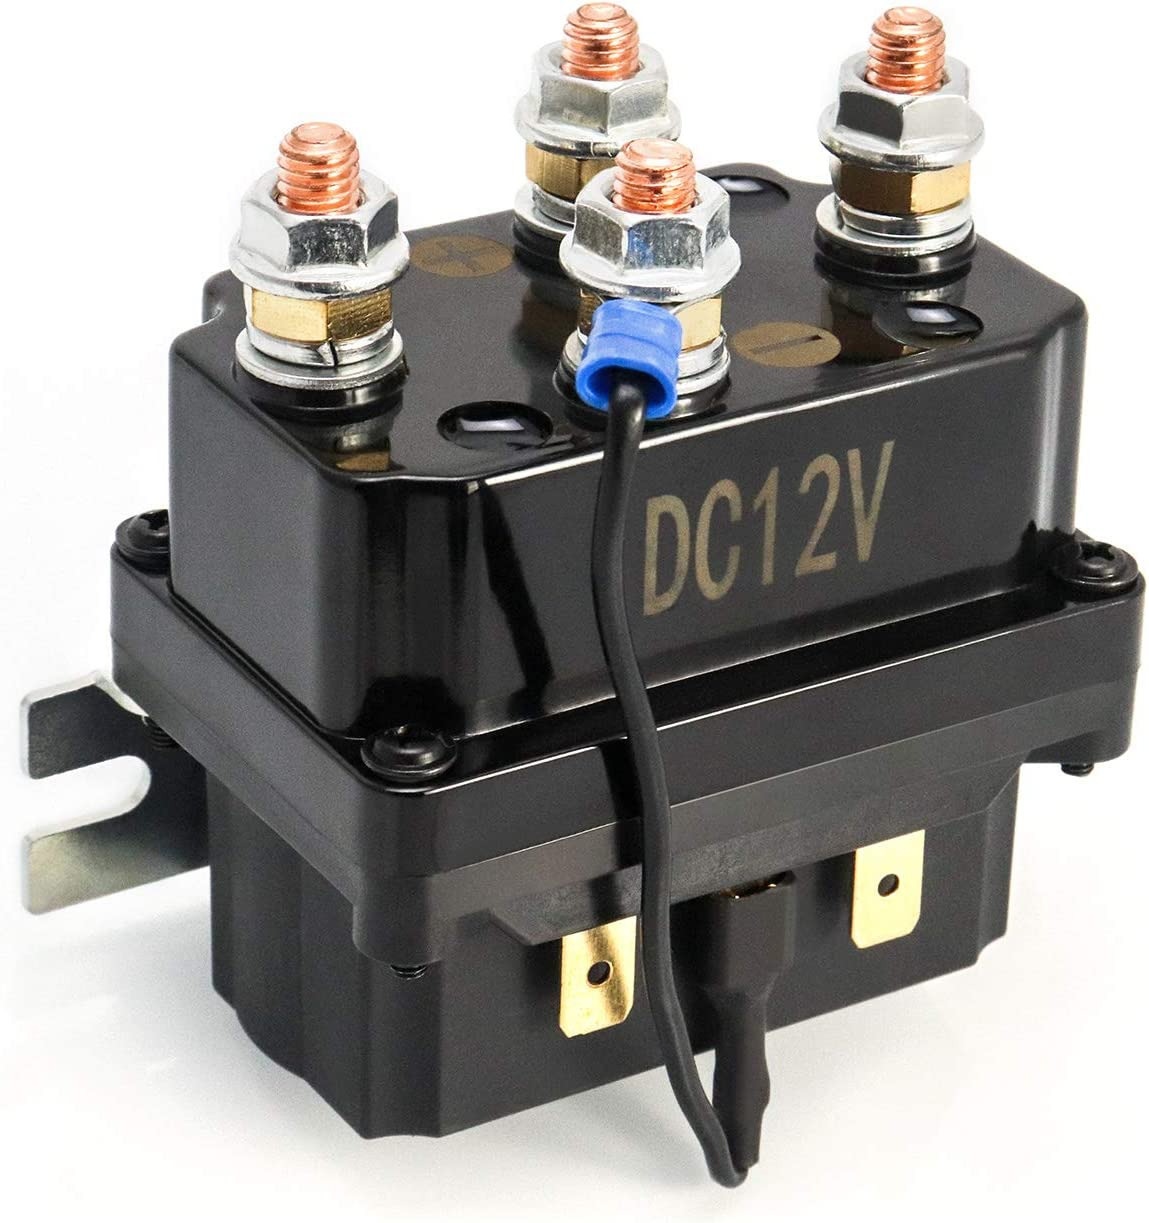 Solenoid Relay, 12V 250A Winch Relay Solenoid Replacement Contactor for 3000-500